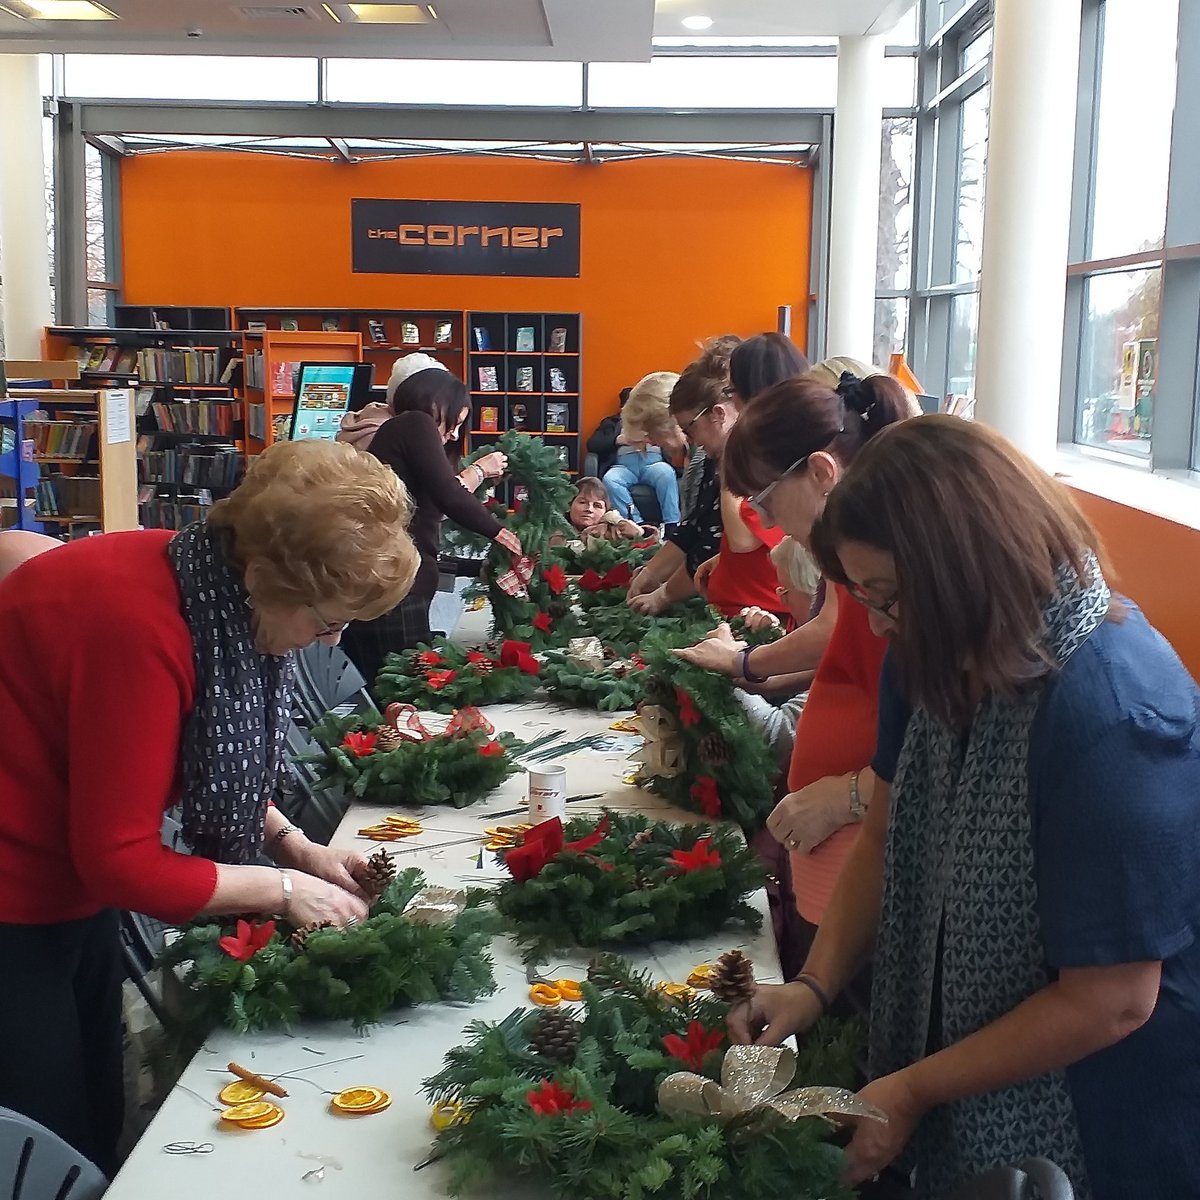 Christmas Door Wreath session at Huyton Library.
#knowsleylibraries 
#Christmas 
#Huytonvillage